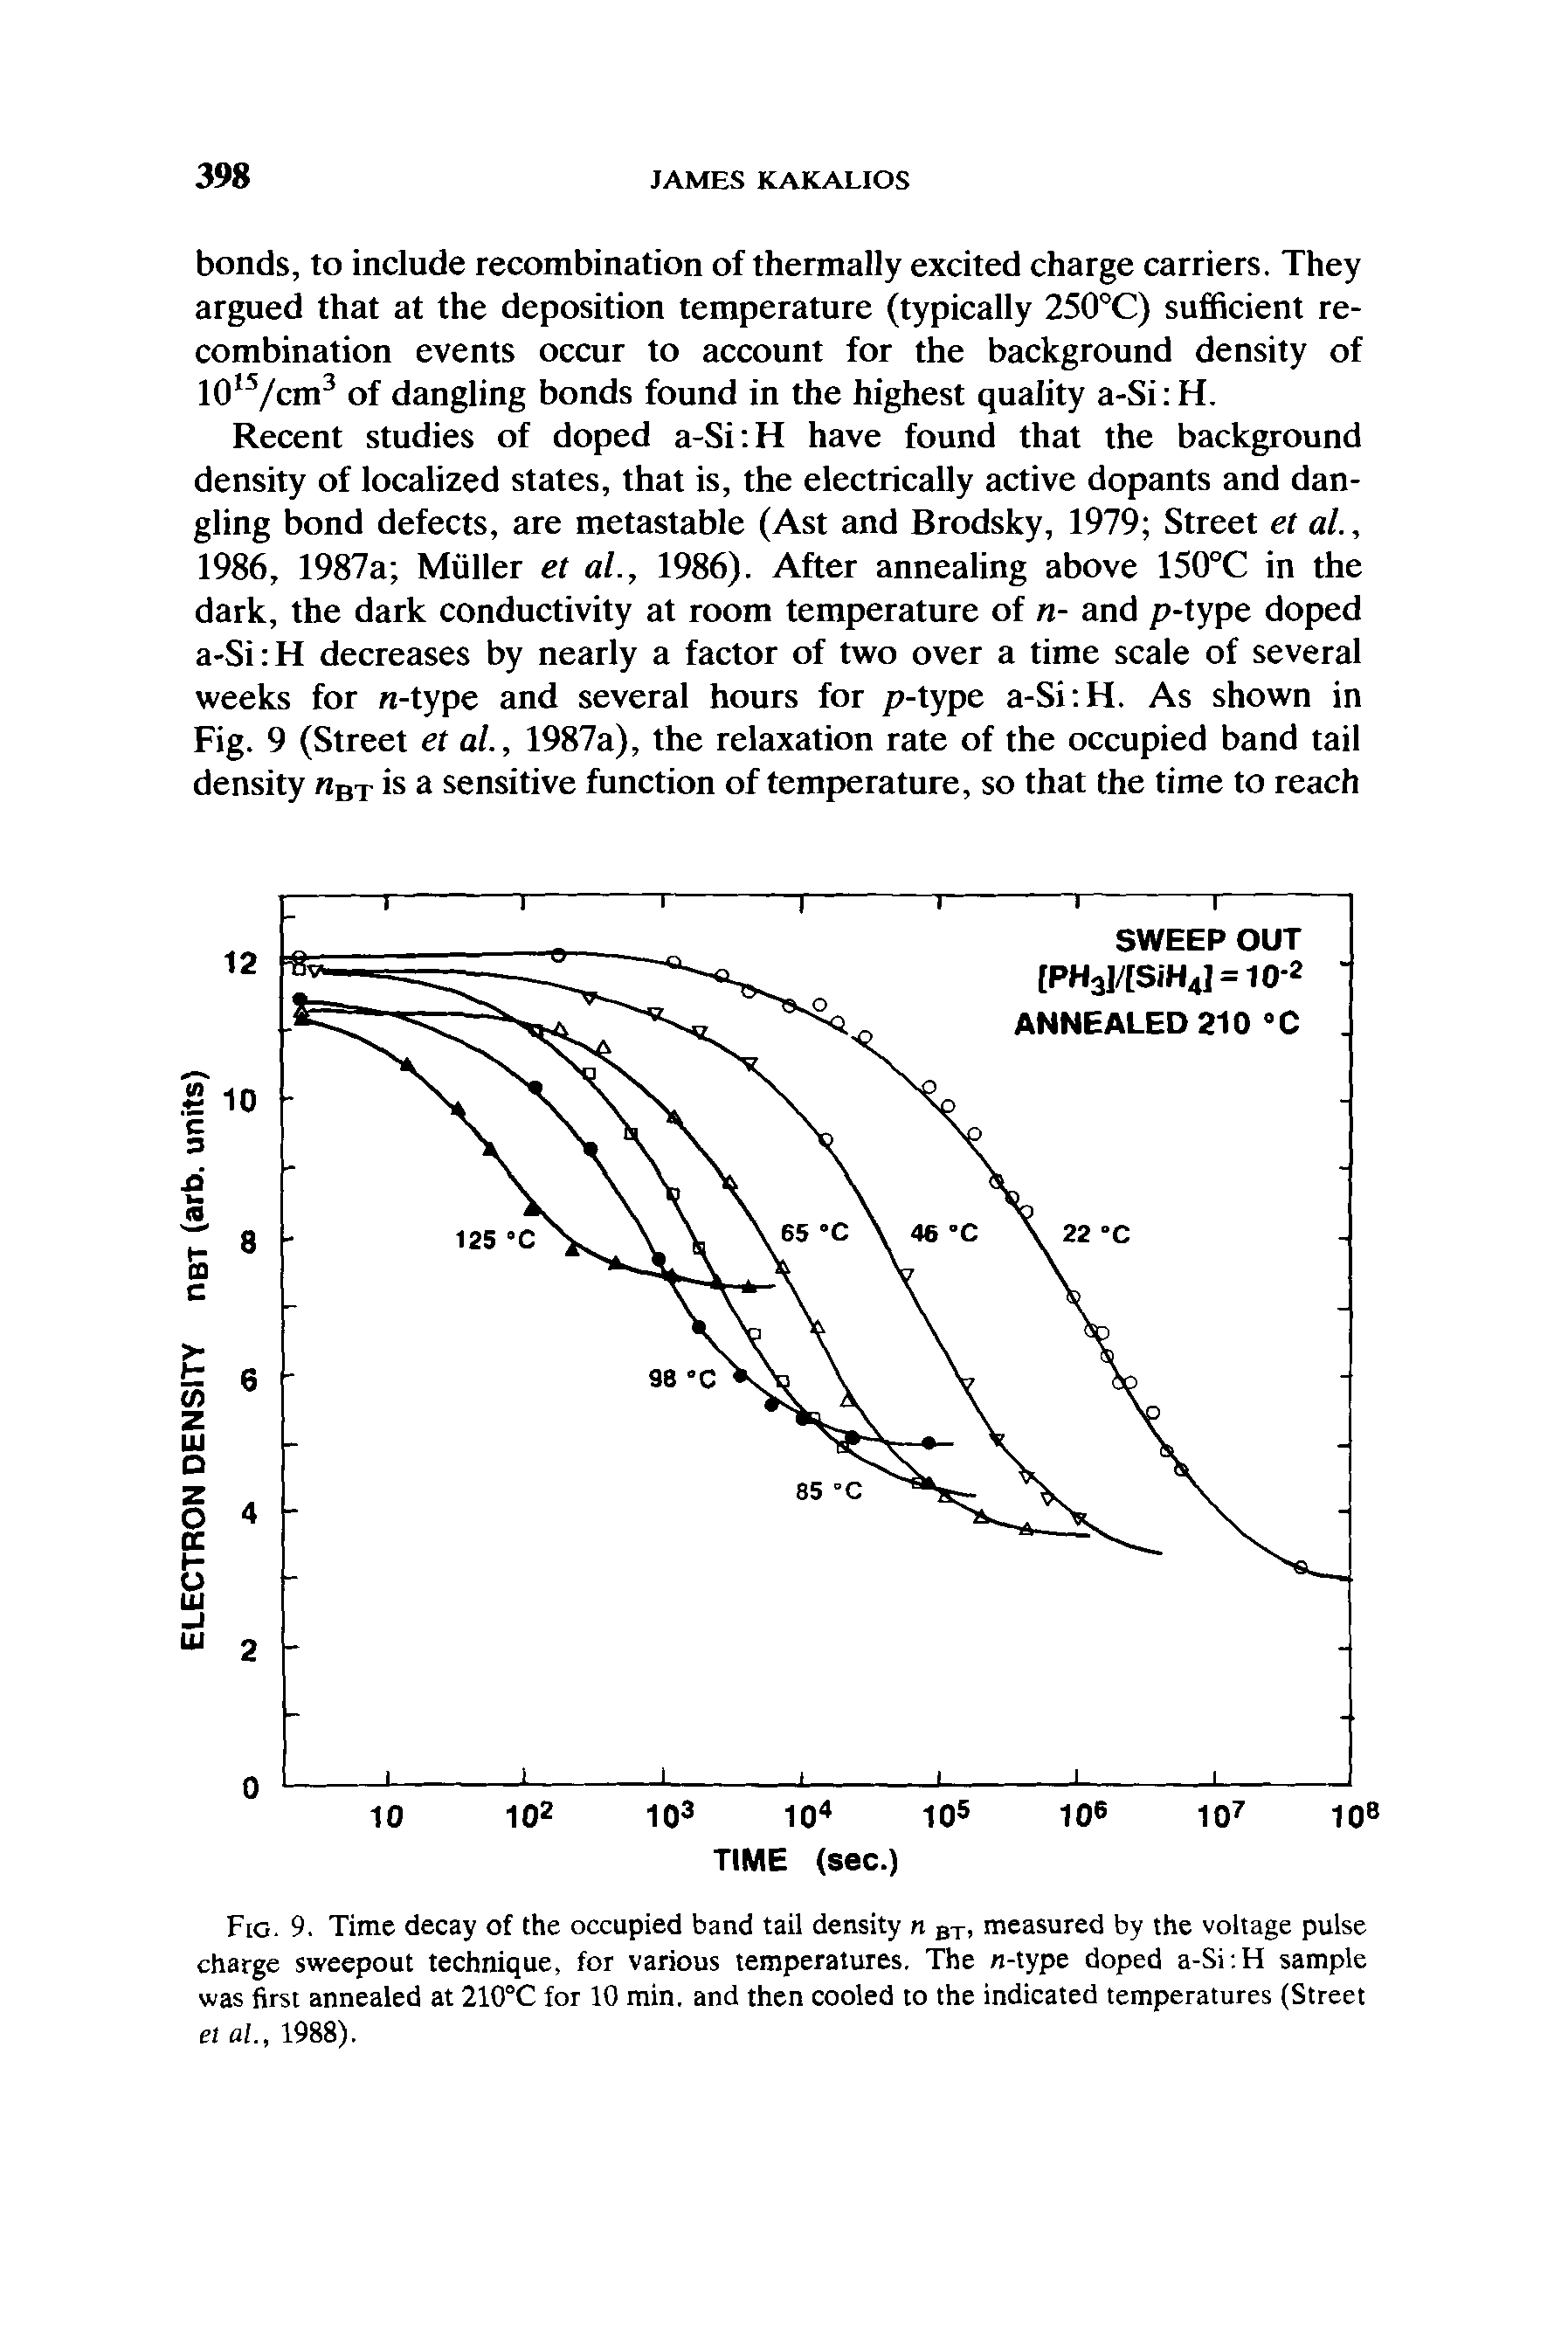 Fig. 9. Time decay of the occupied band tail density n Bx, measured by the voltage pulse charge sweepout technique, for various temperatures. The n-type doped a-Si.H sample was first annealed at 210°C for 10 min. and then cooled to the indicated temperatures (Street et al., 1988).